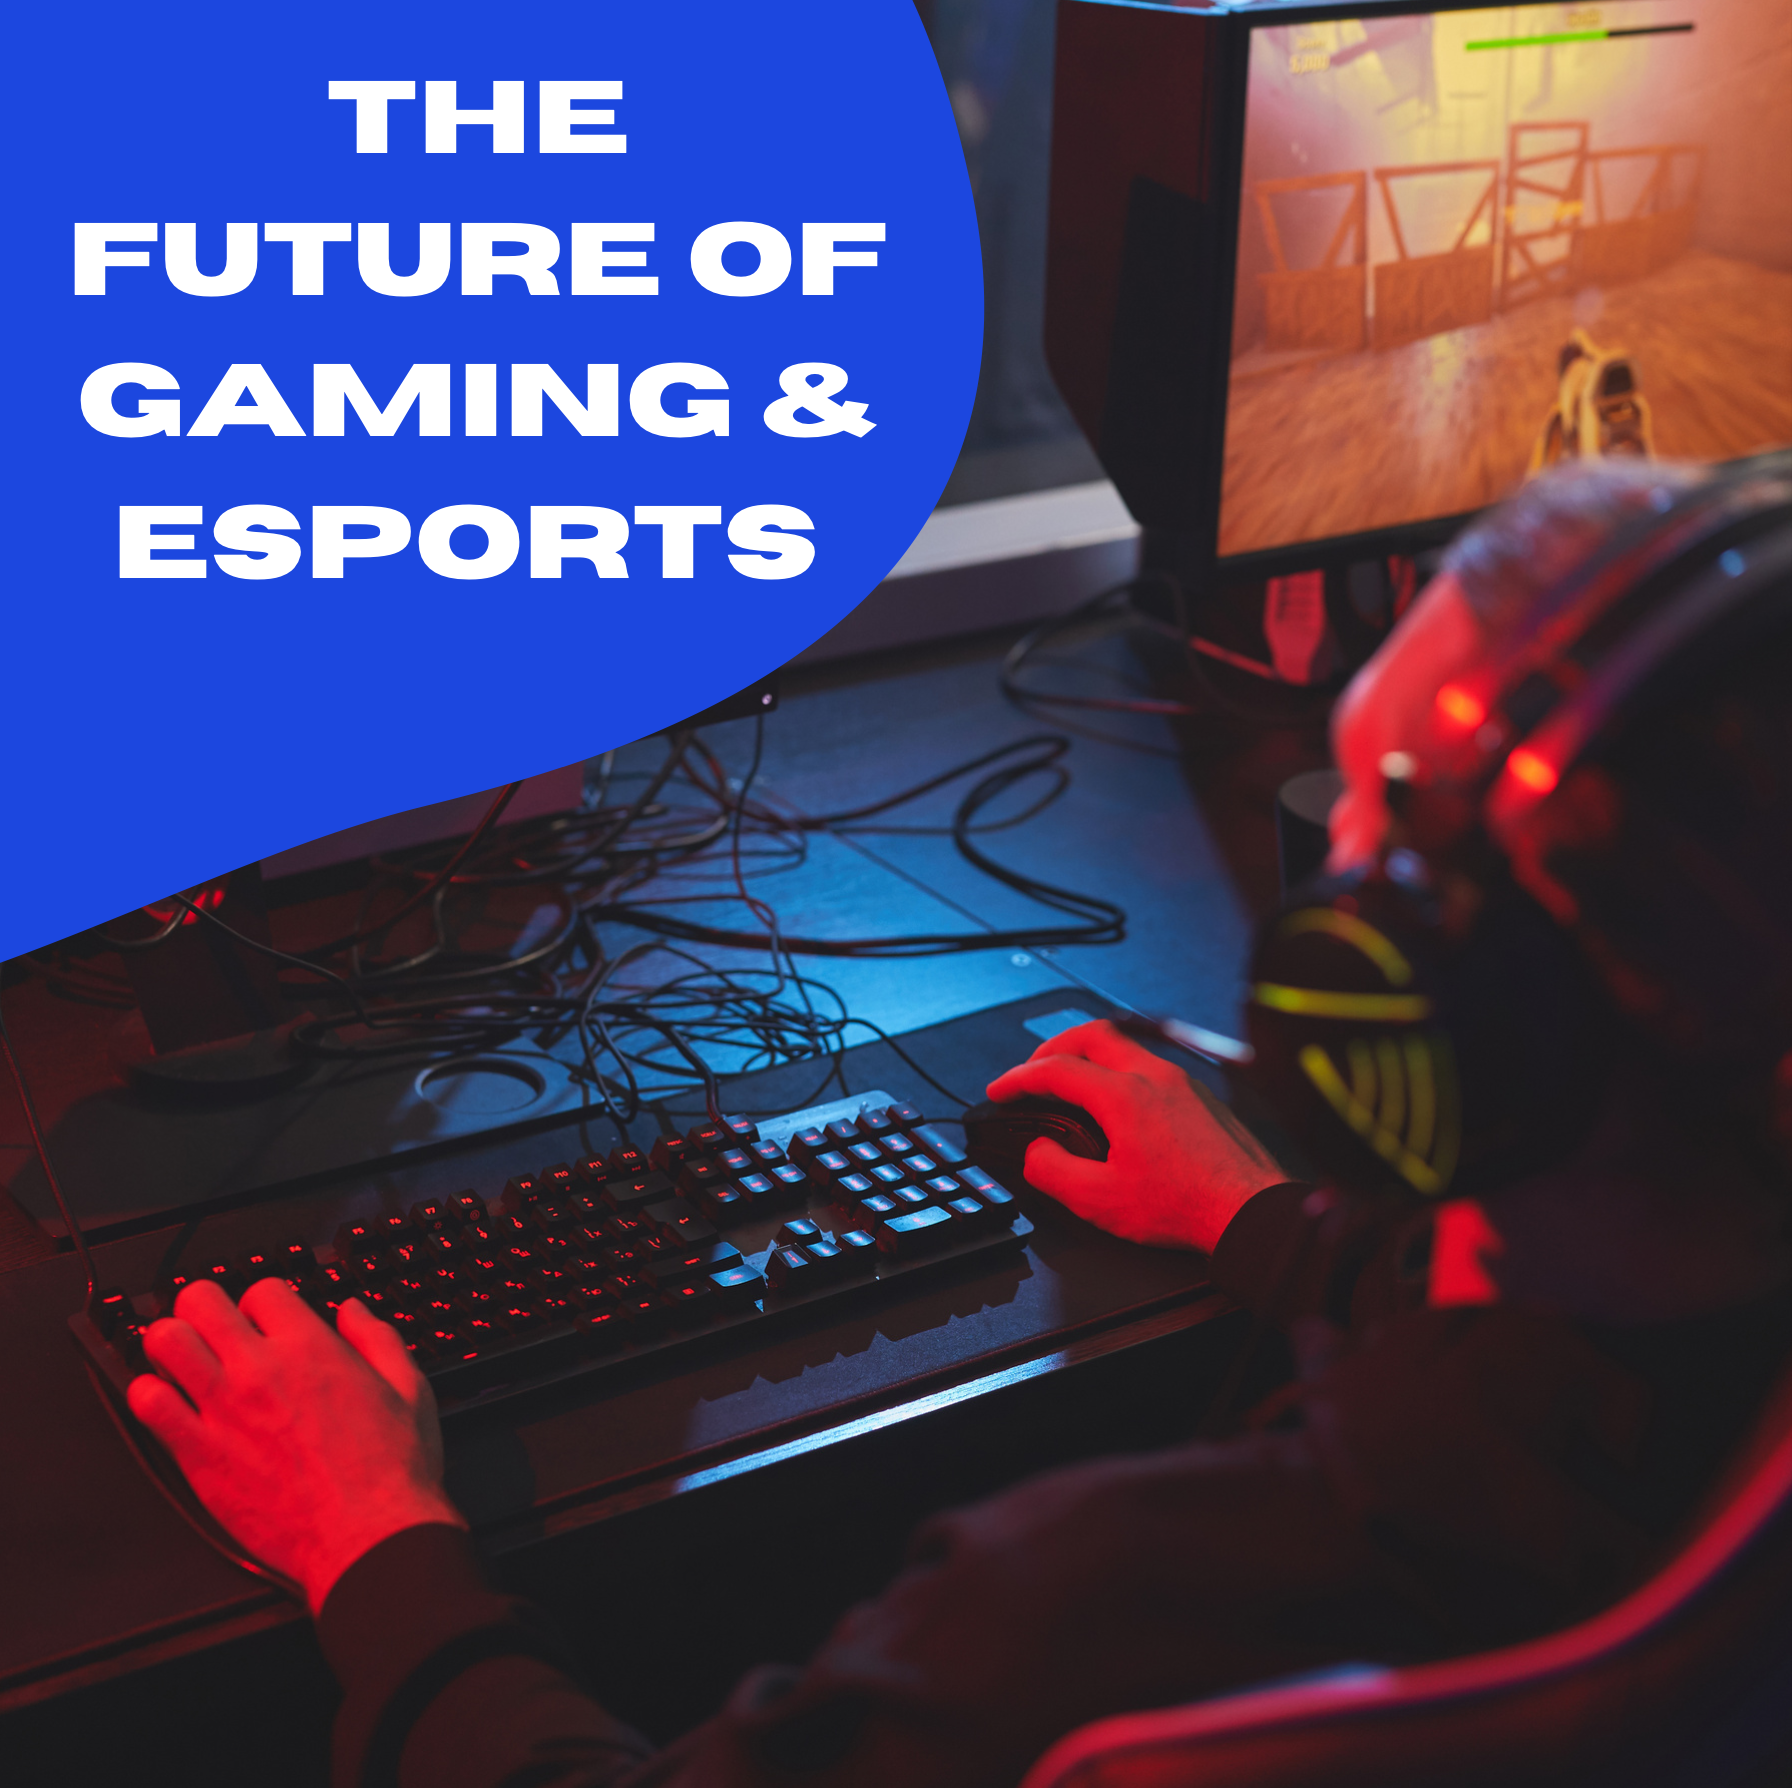 The Future of Gaming and Esports